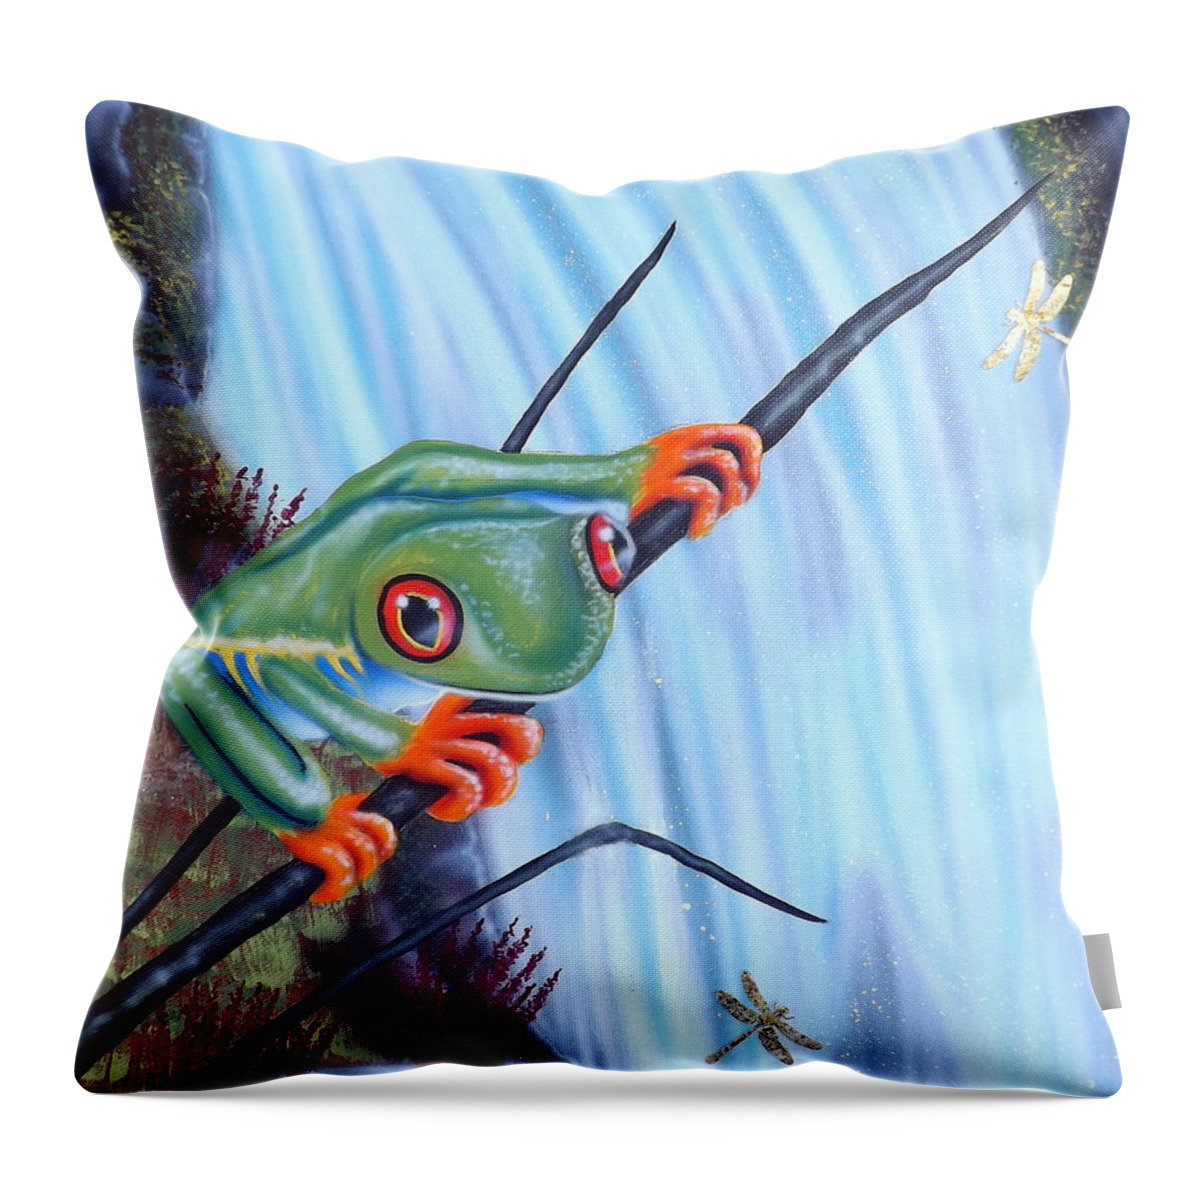 Tree Frog Throw Pillow featuring the painting Tree Frog by Darren Robinson